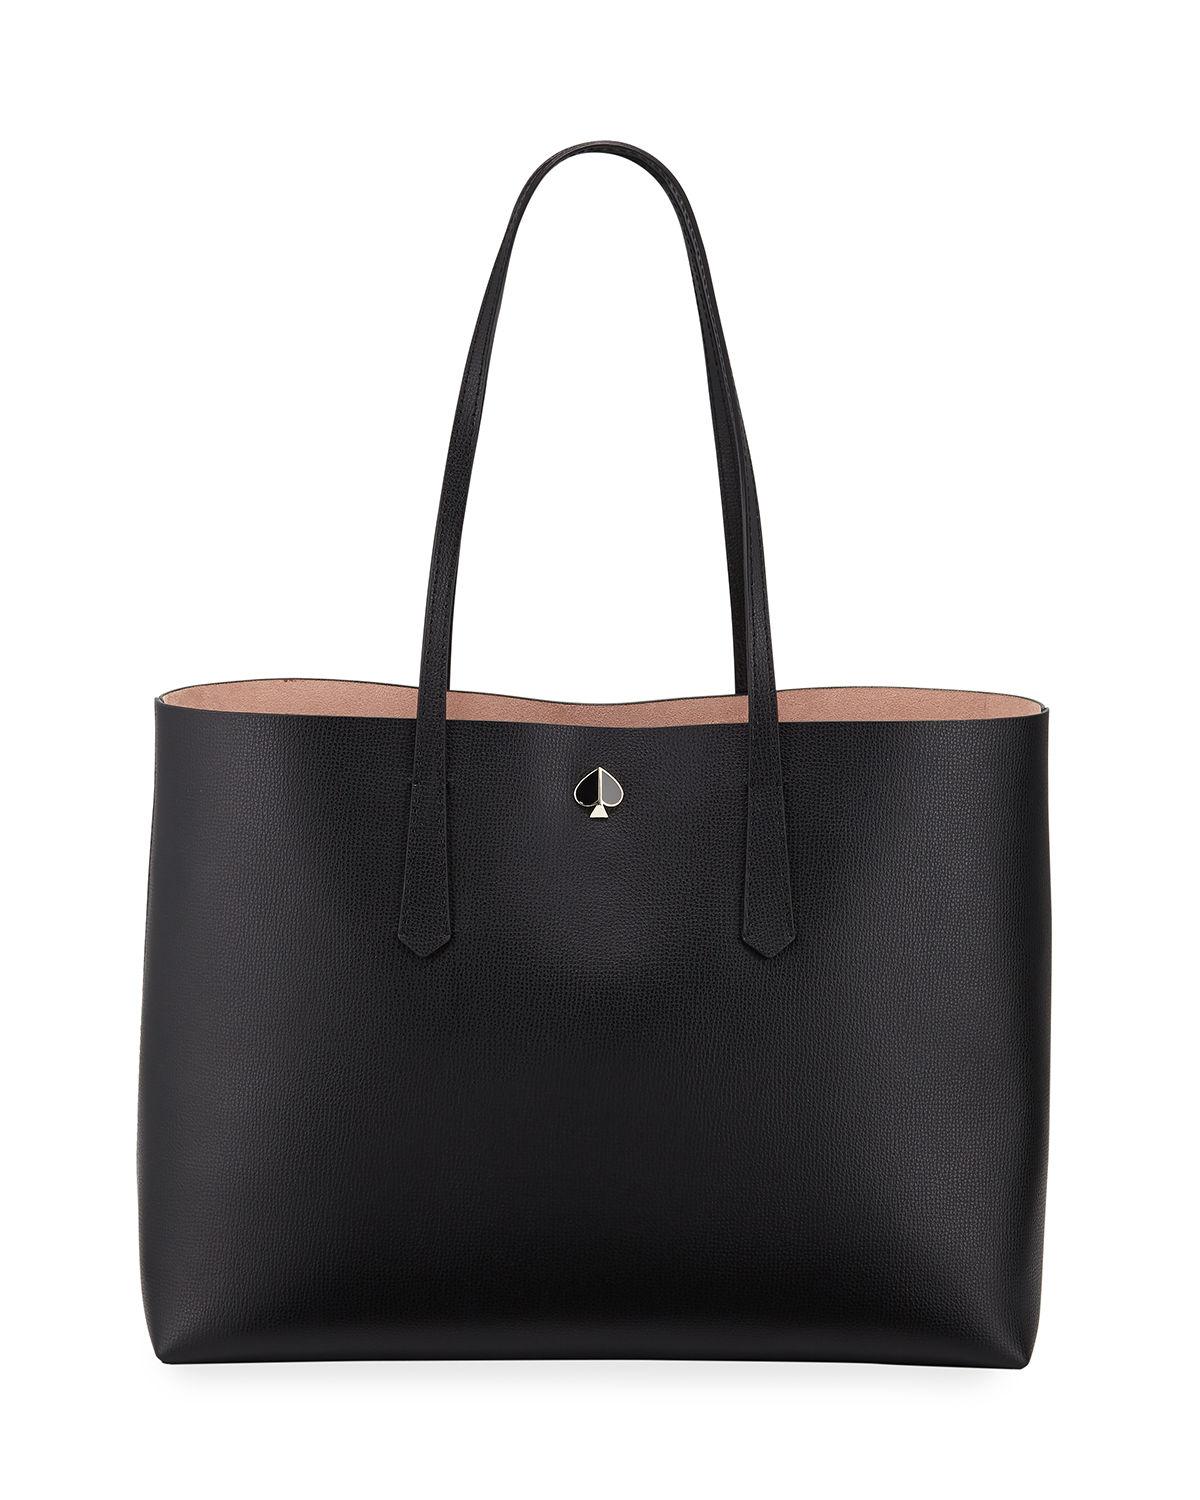 Kate Spade Molly Large Leather Tote in Bright Pink (Black) - Lyst